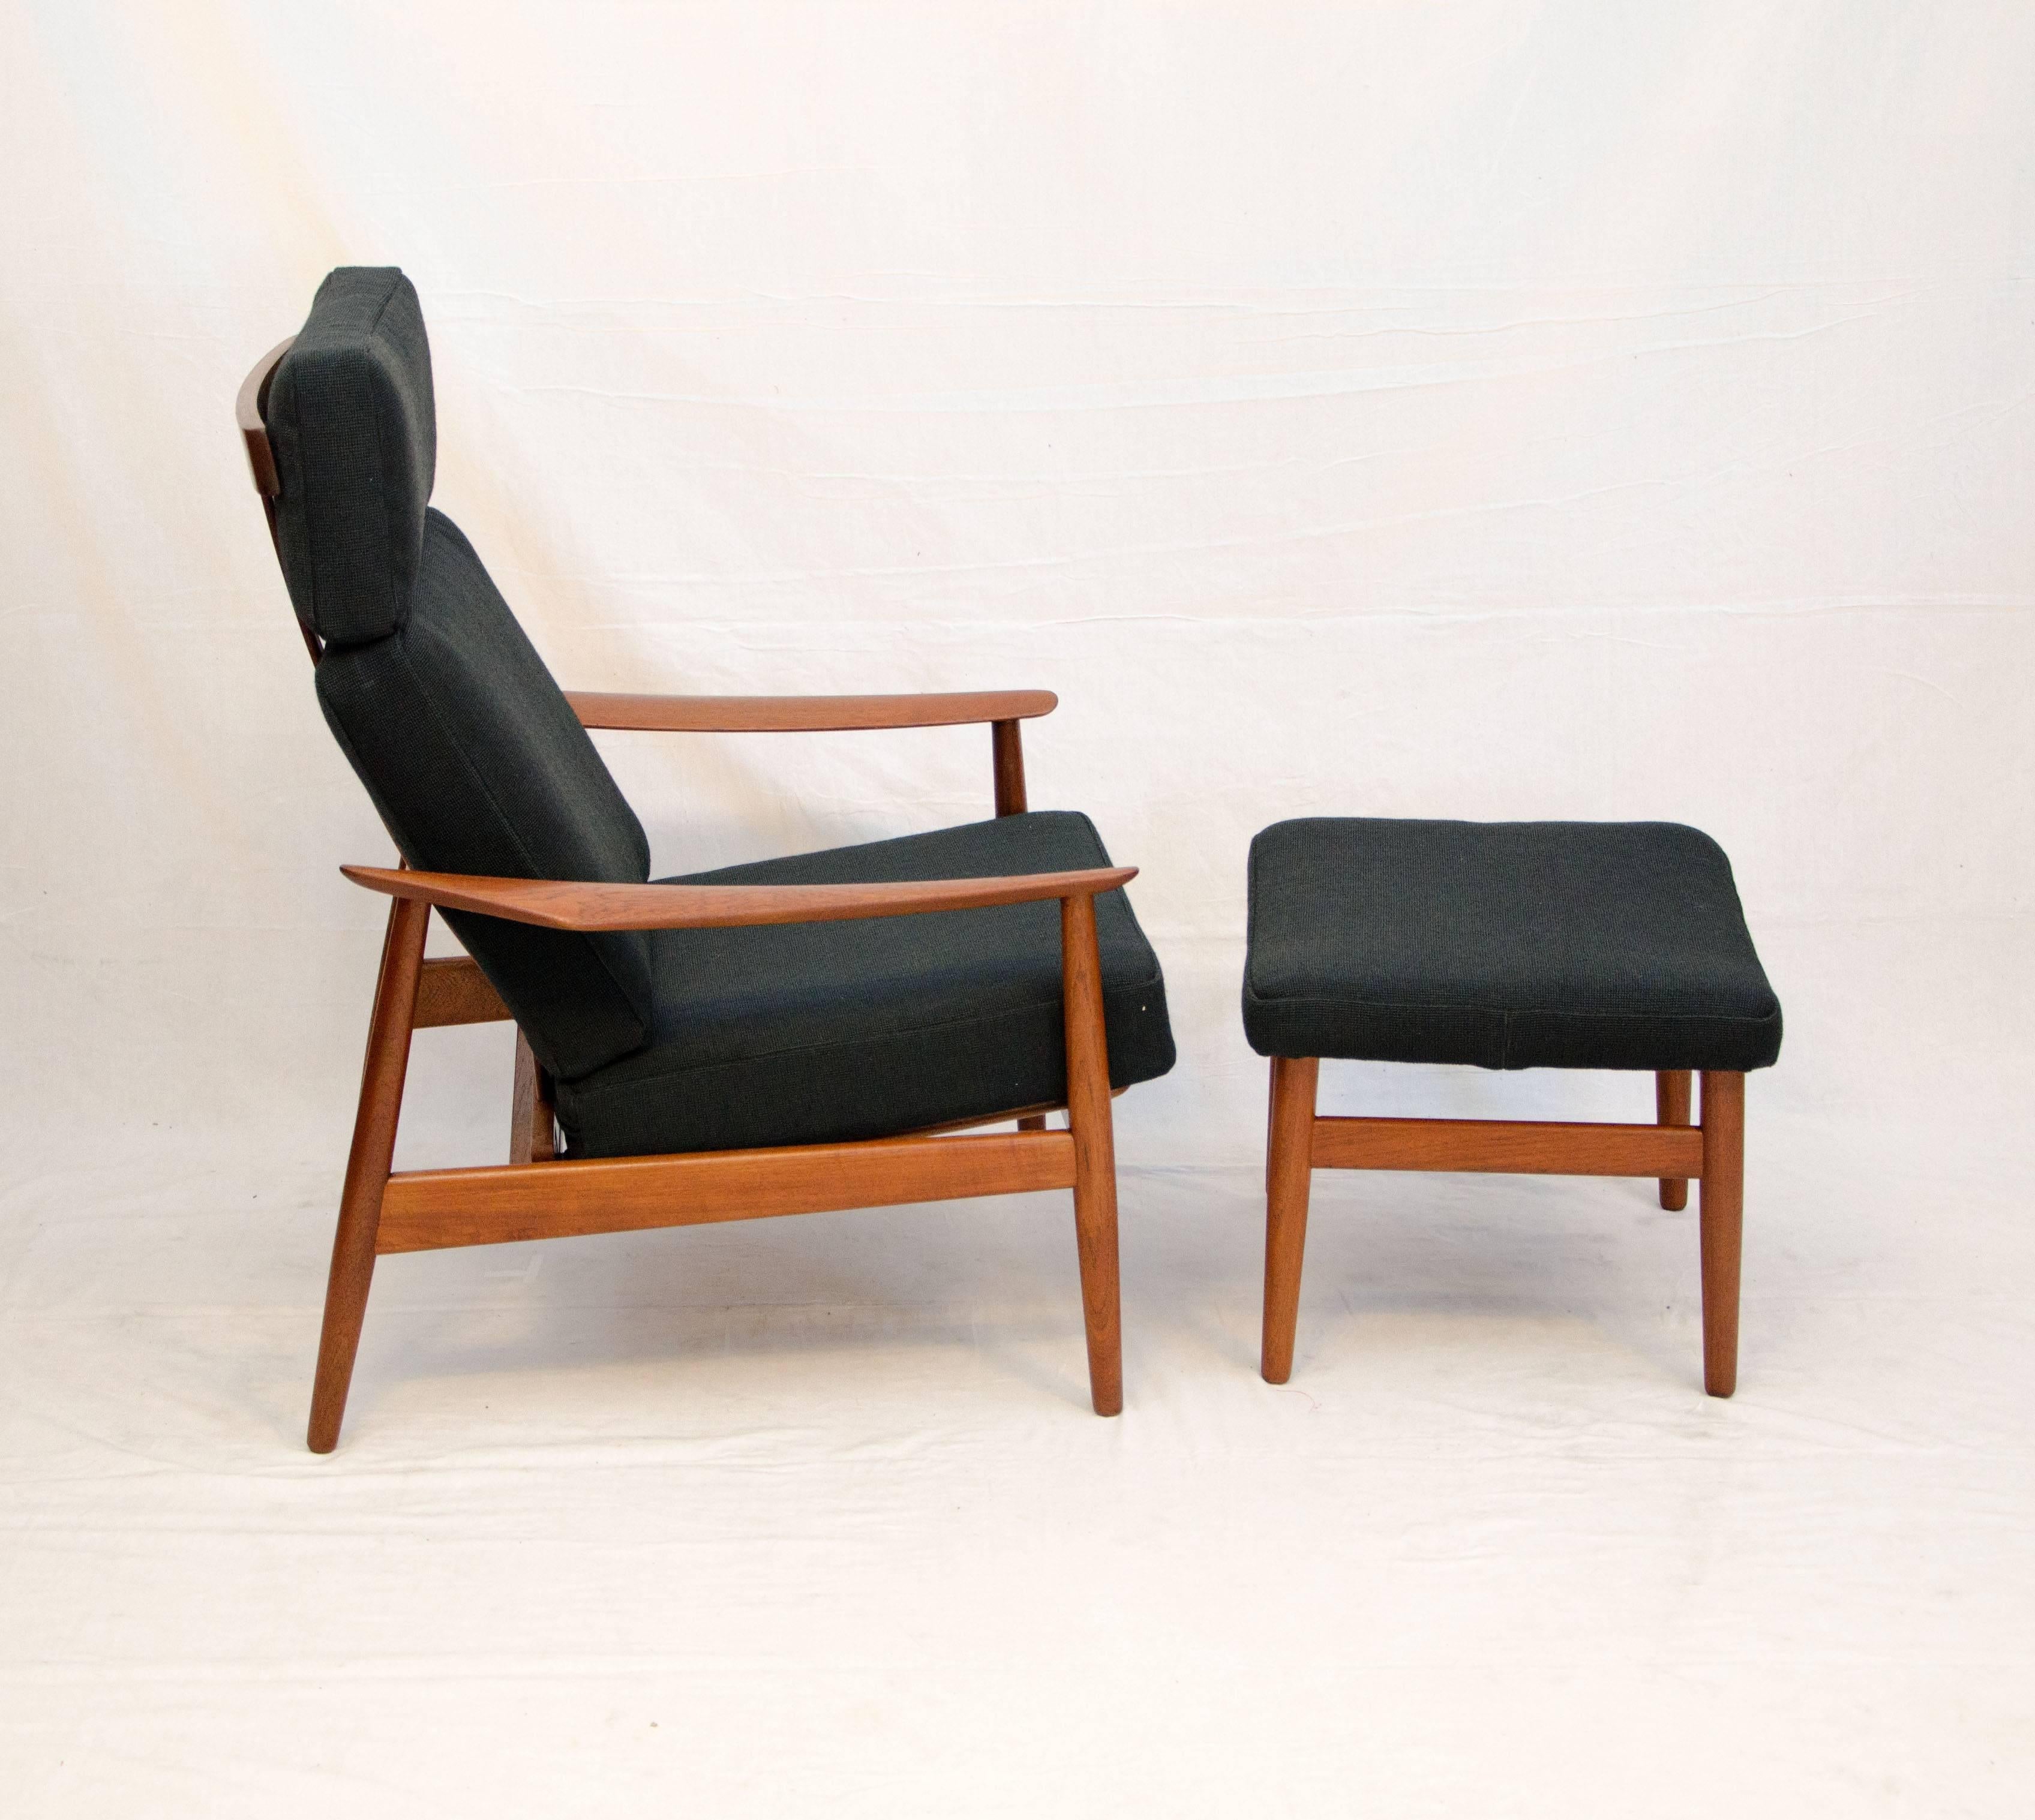 Very comfortable three position high back Danish teak reclining lounge chair with matching ottoman. Both retain the original France & Sons circular tags. The reclining positions require manual adjustment. The fabric is a durable nubby black gross